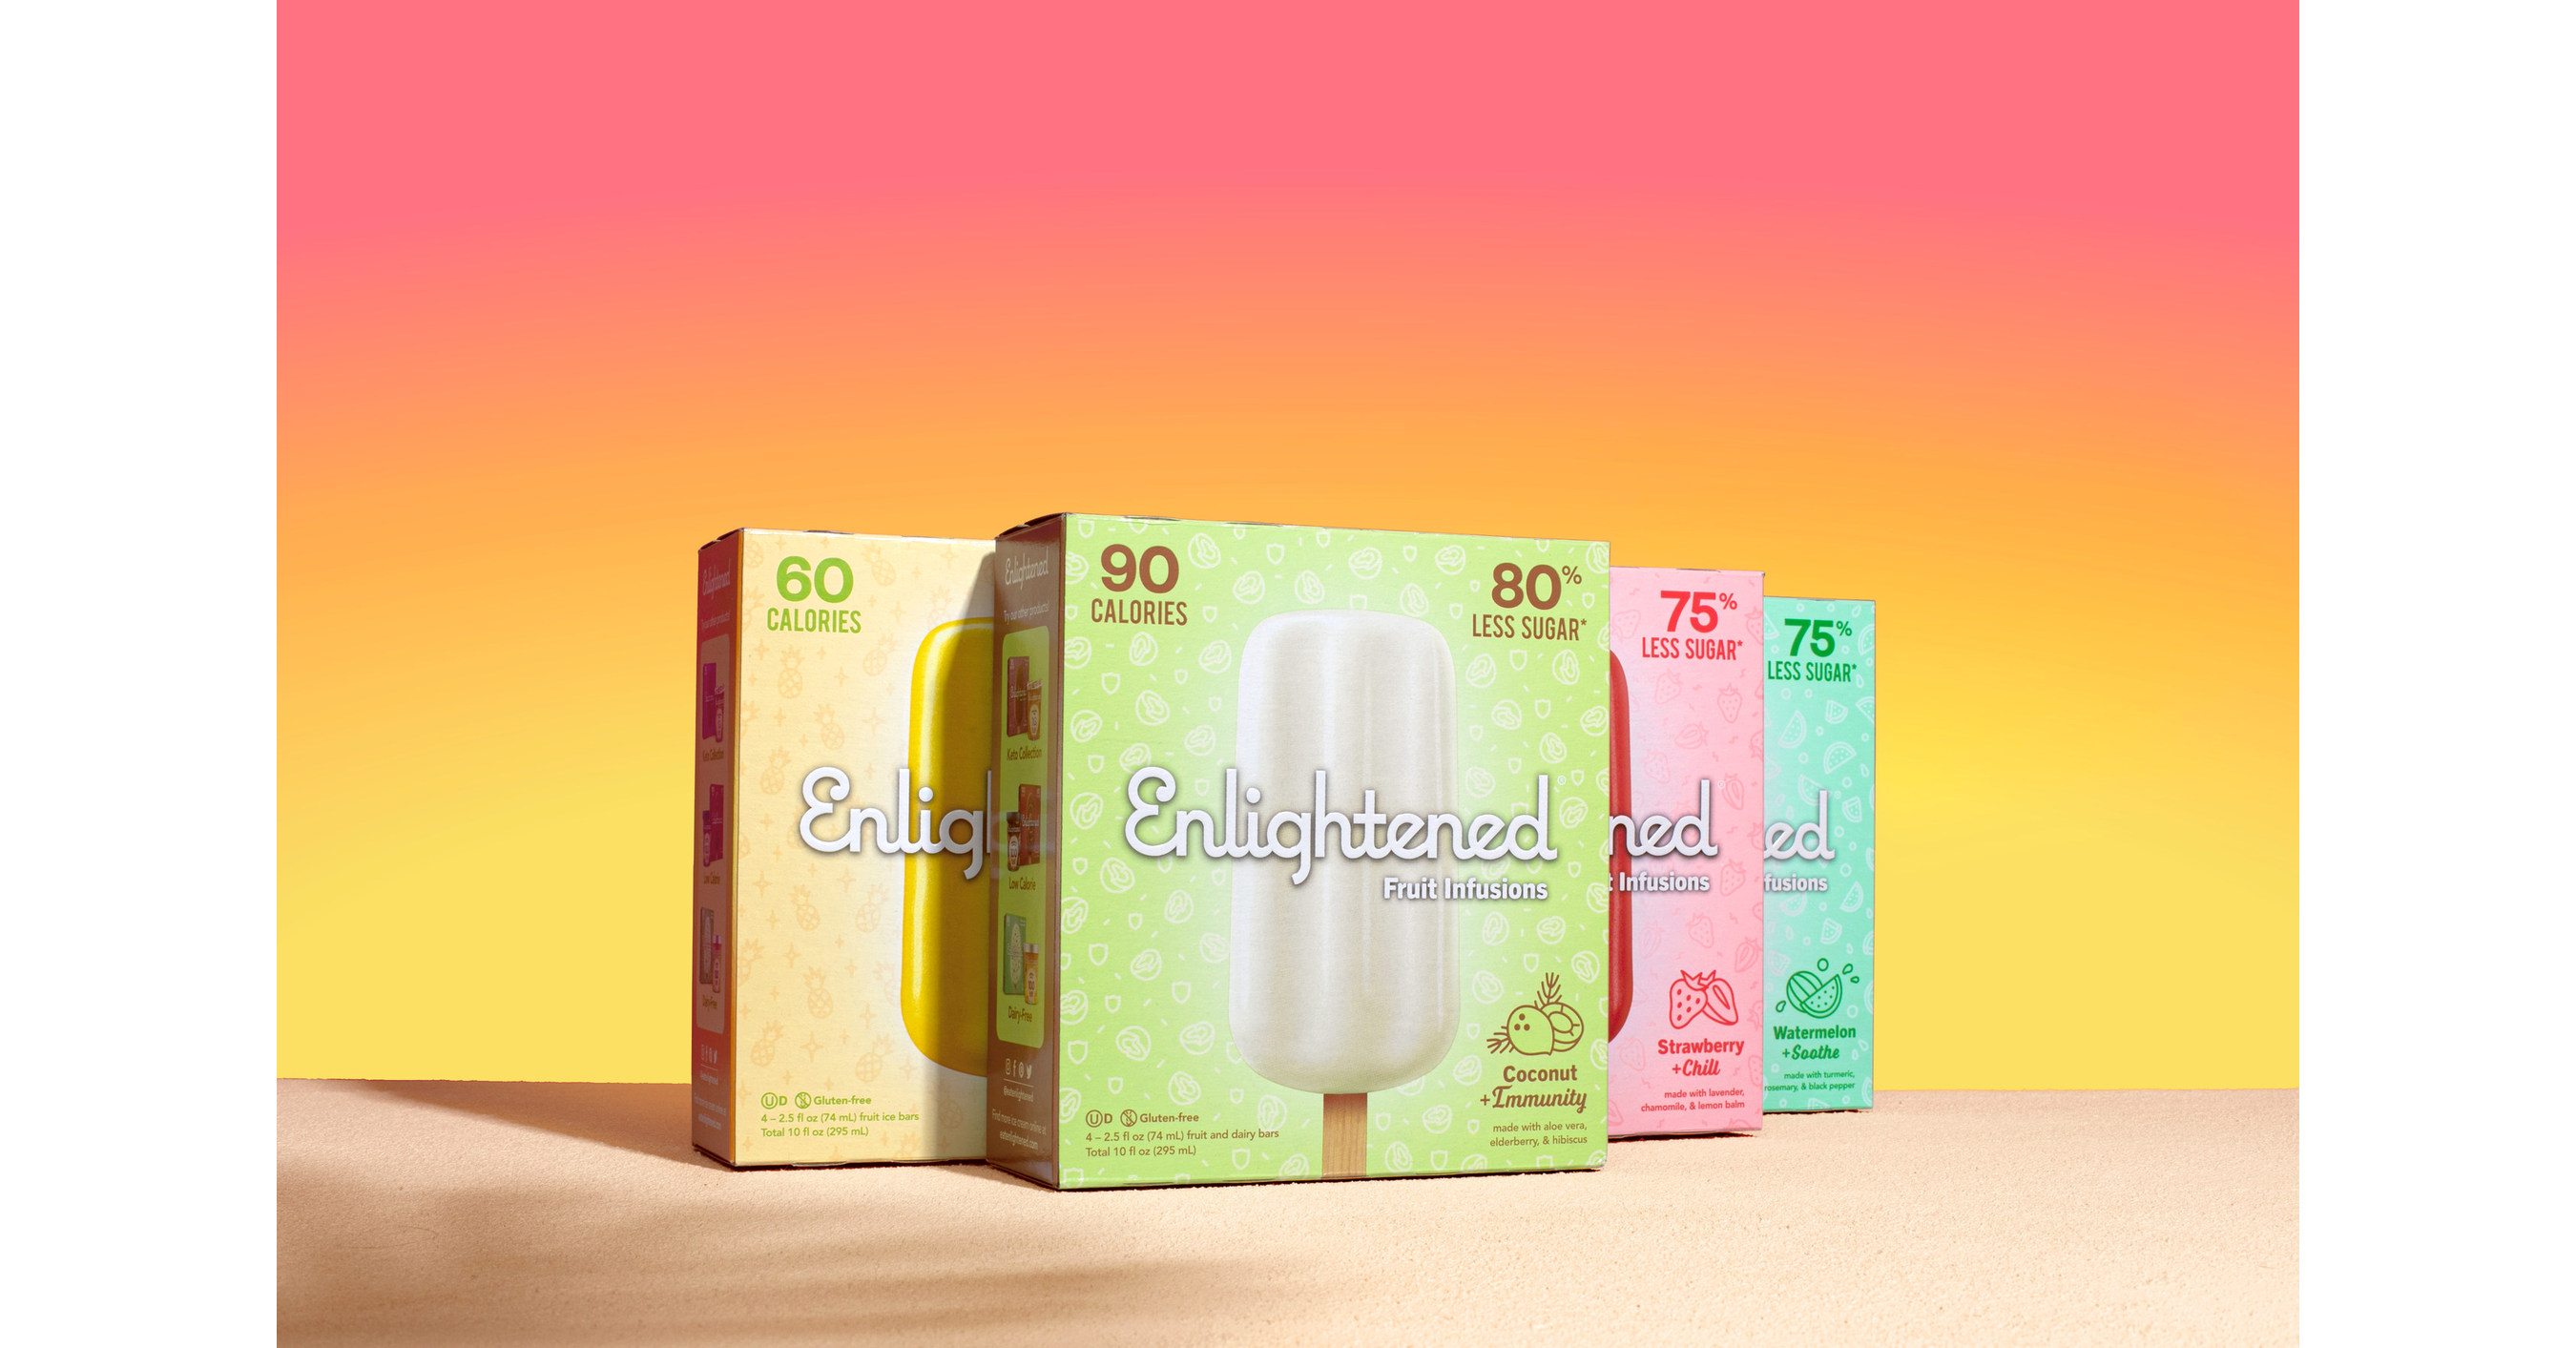 Enlightened Enters New Category with Line of Low-Sugar Fruit Bars